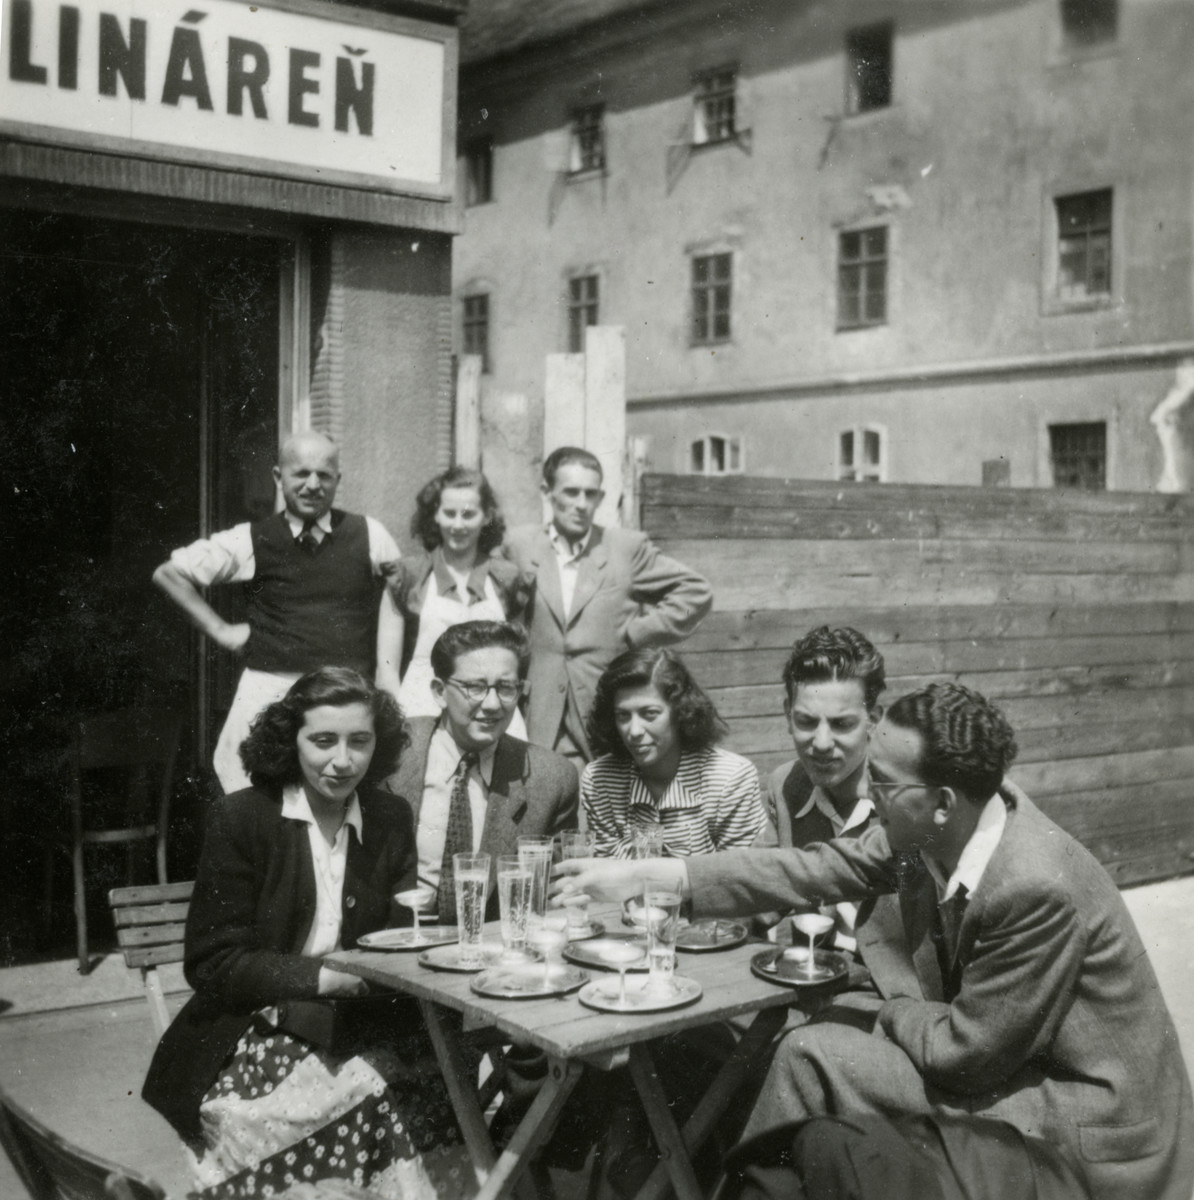 A group of friends from the Zionist youth group Gordonia stop at a cafe in Bratislava, on their way to Israel.

Pictured seated on the right are Zvi and Itzhak Braf.